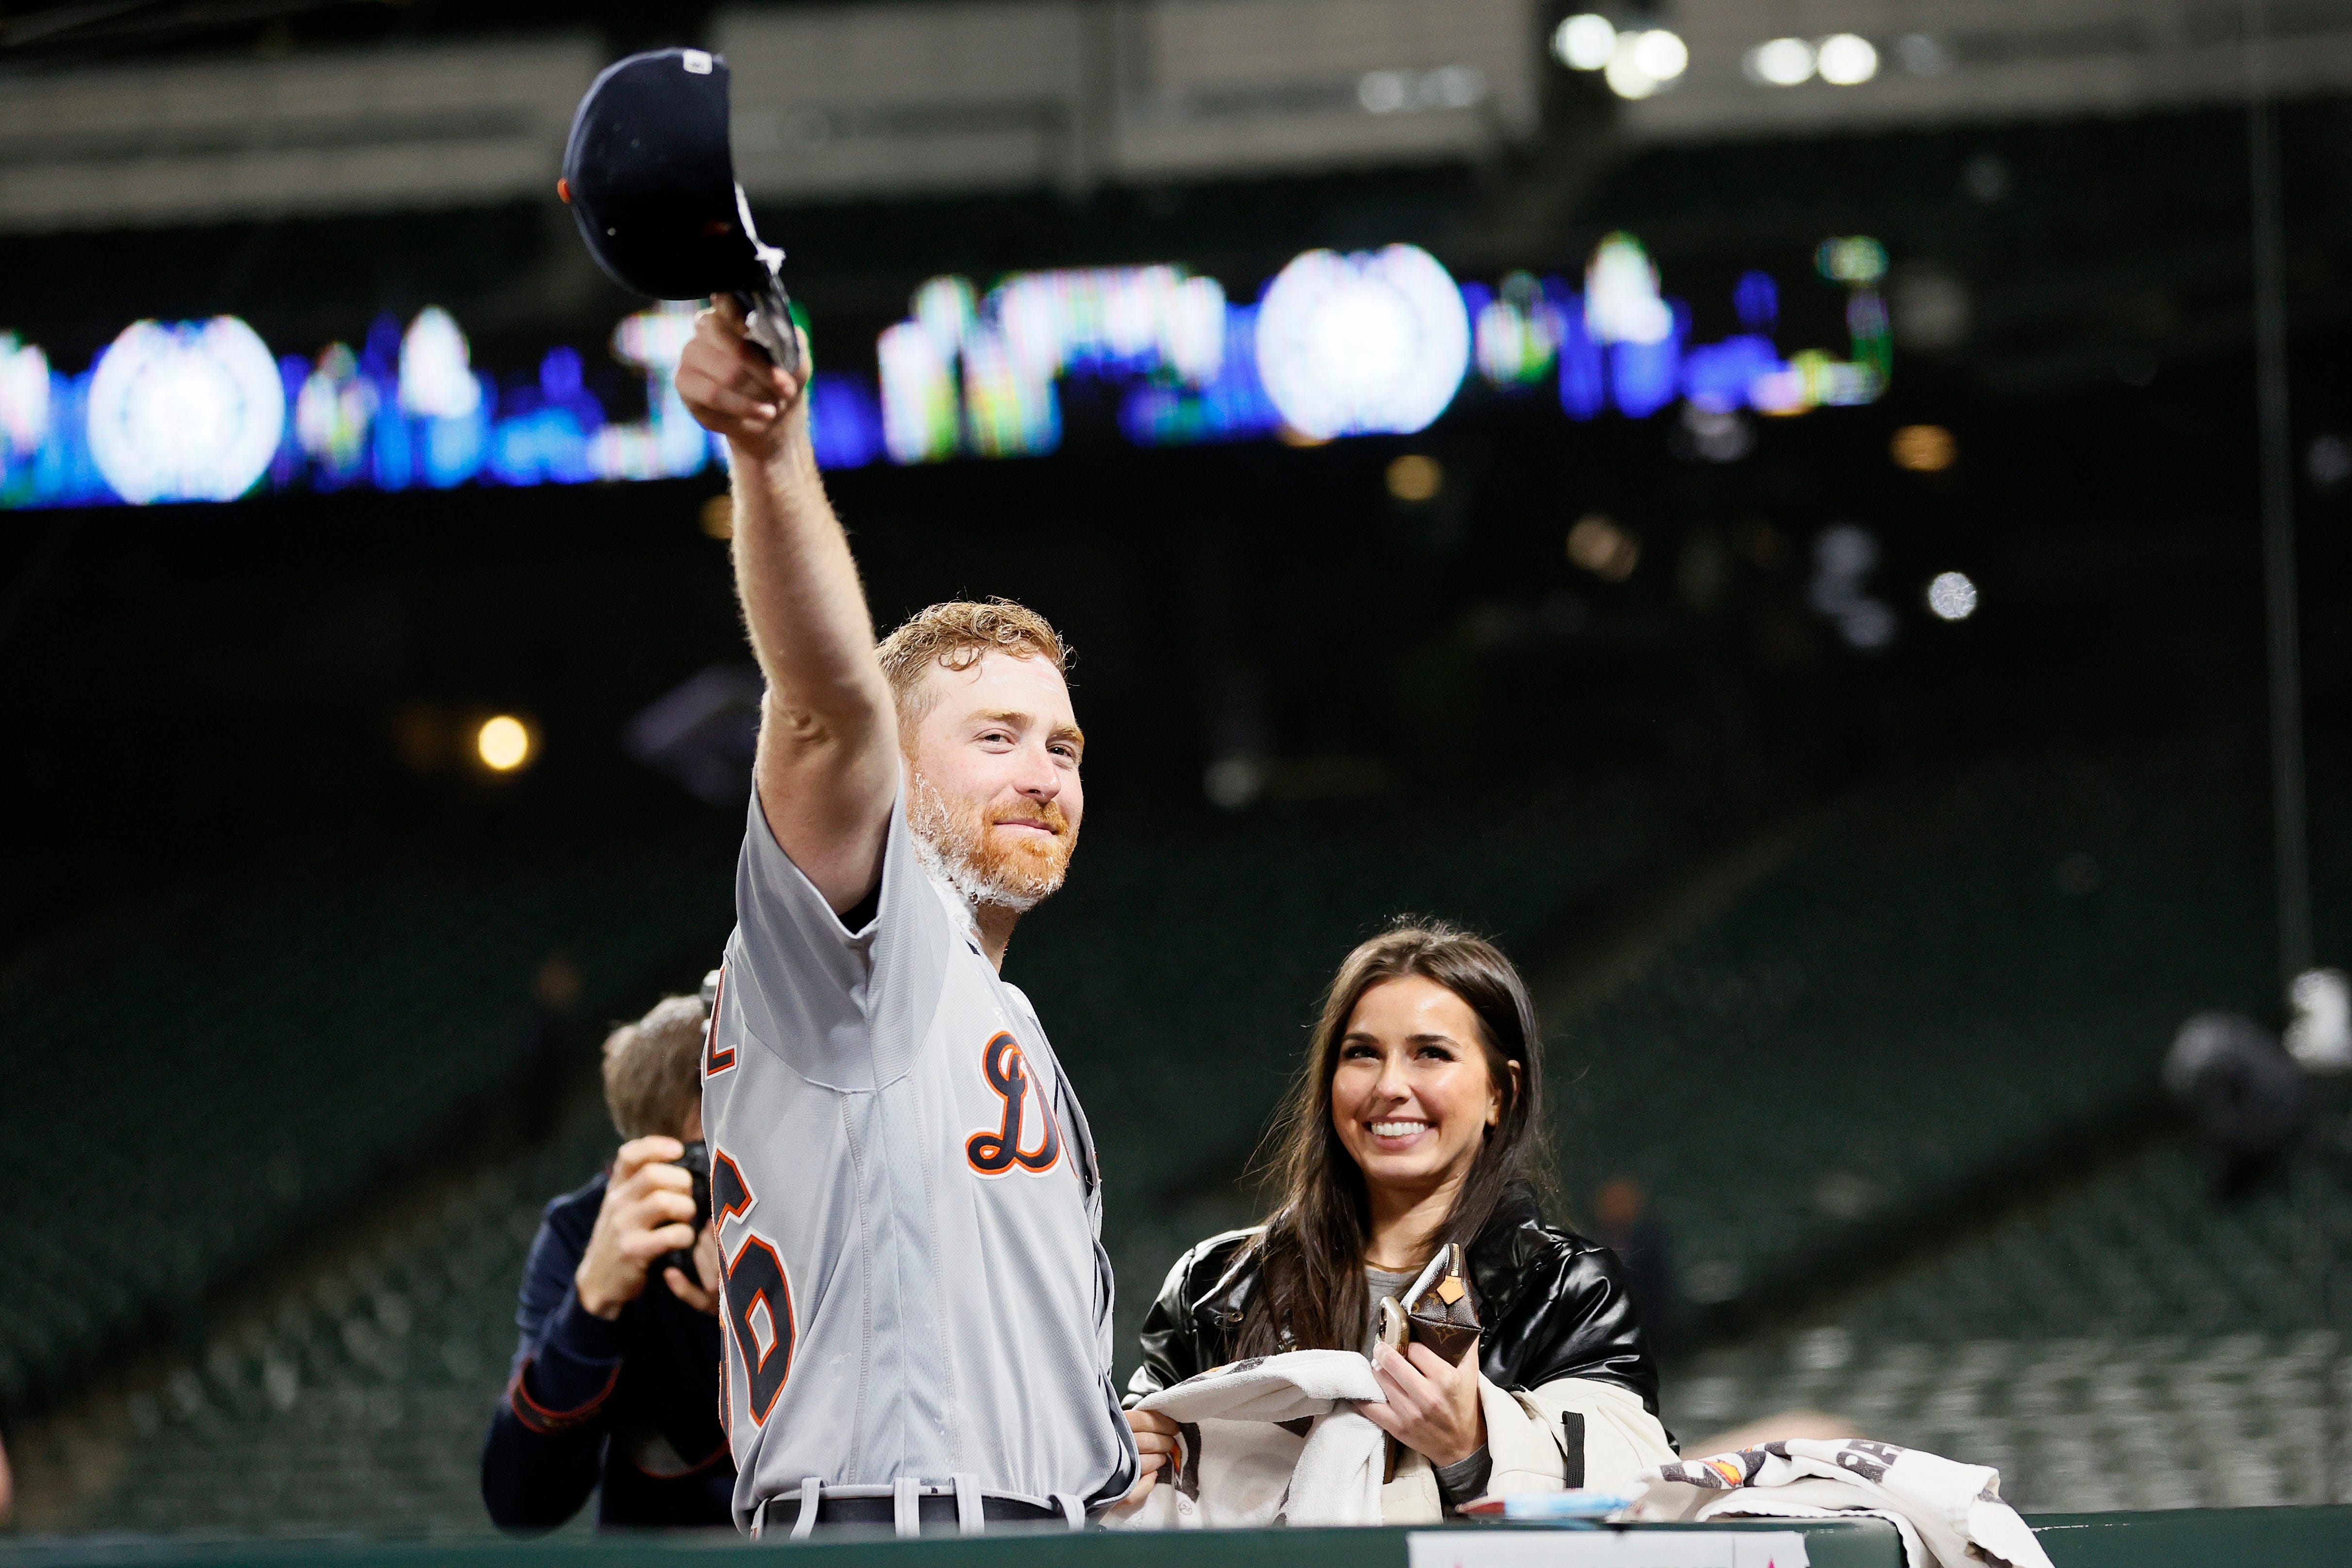 Detroit Tigers pitcher Spencer Turnbull celebrates with his girlfriend after his no-hitter against the Seattle Mariners at T-Mobile Park on May 18, 2021 in Seattle.